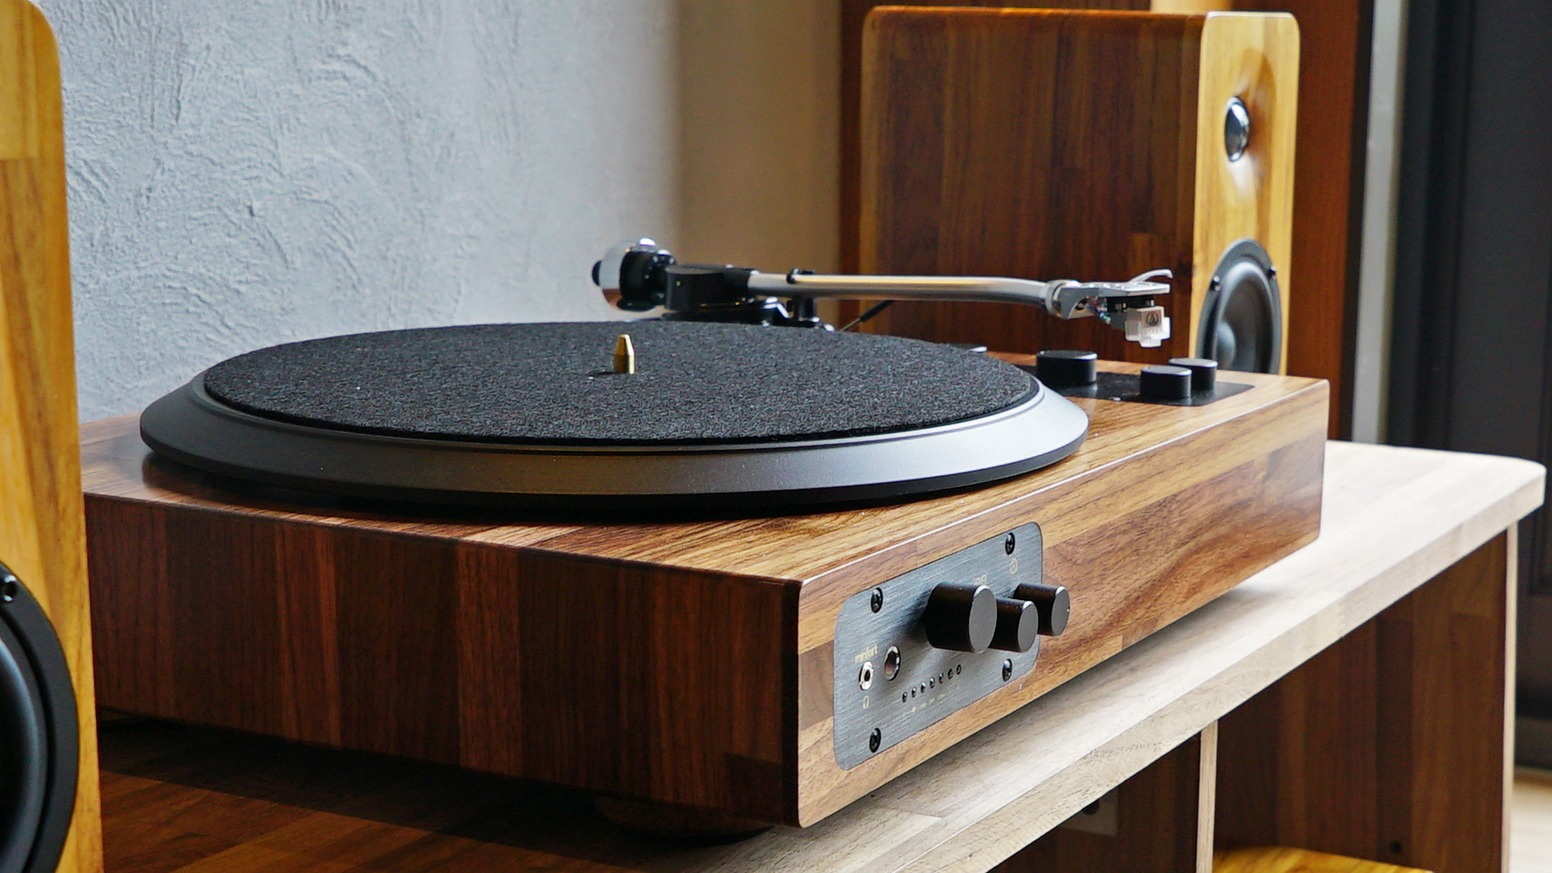 Enjoy all your vinyl records AND online playlists: Minfort's wooden turntable is the perfect mix of retro and modern.